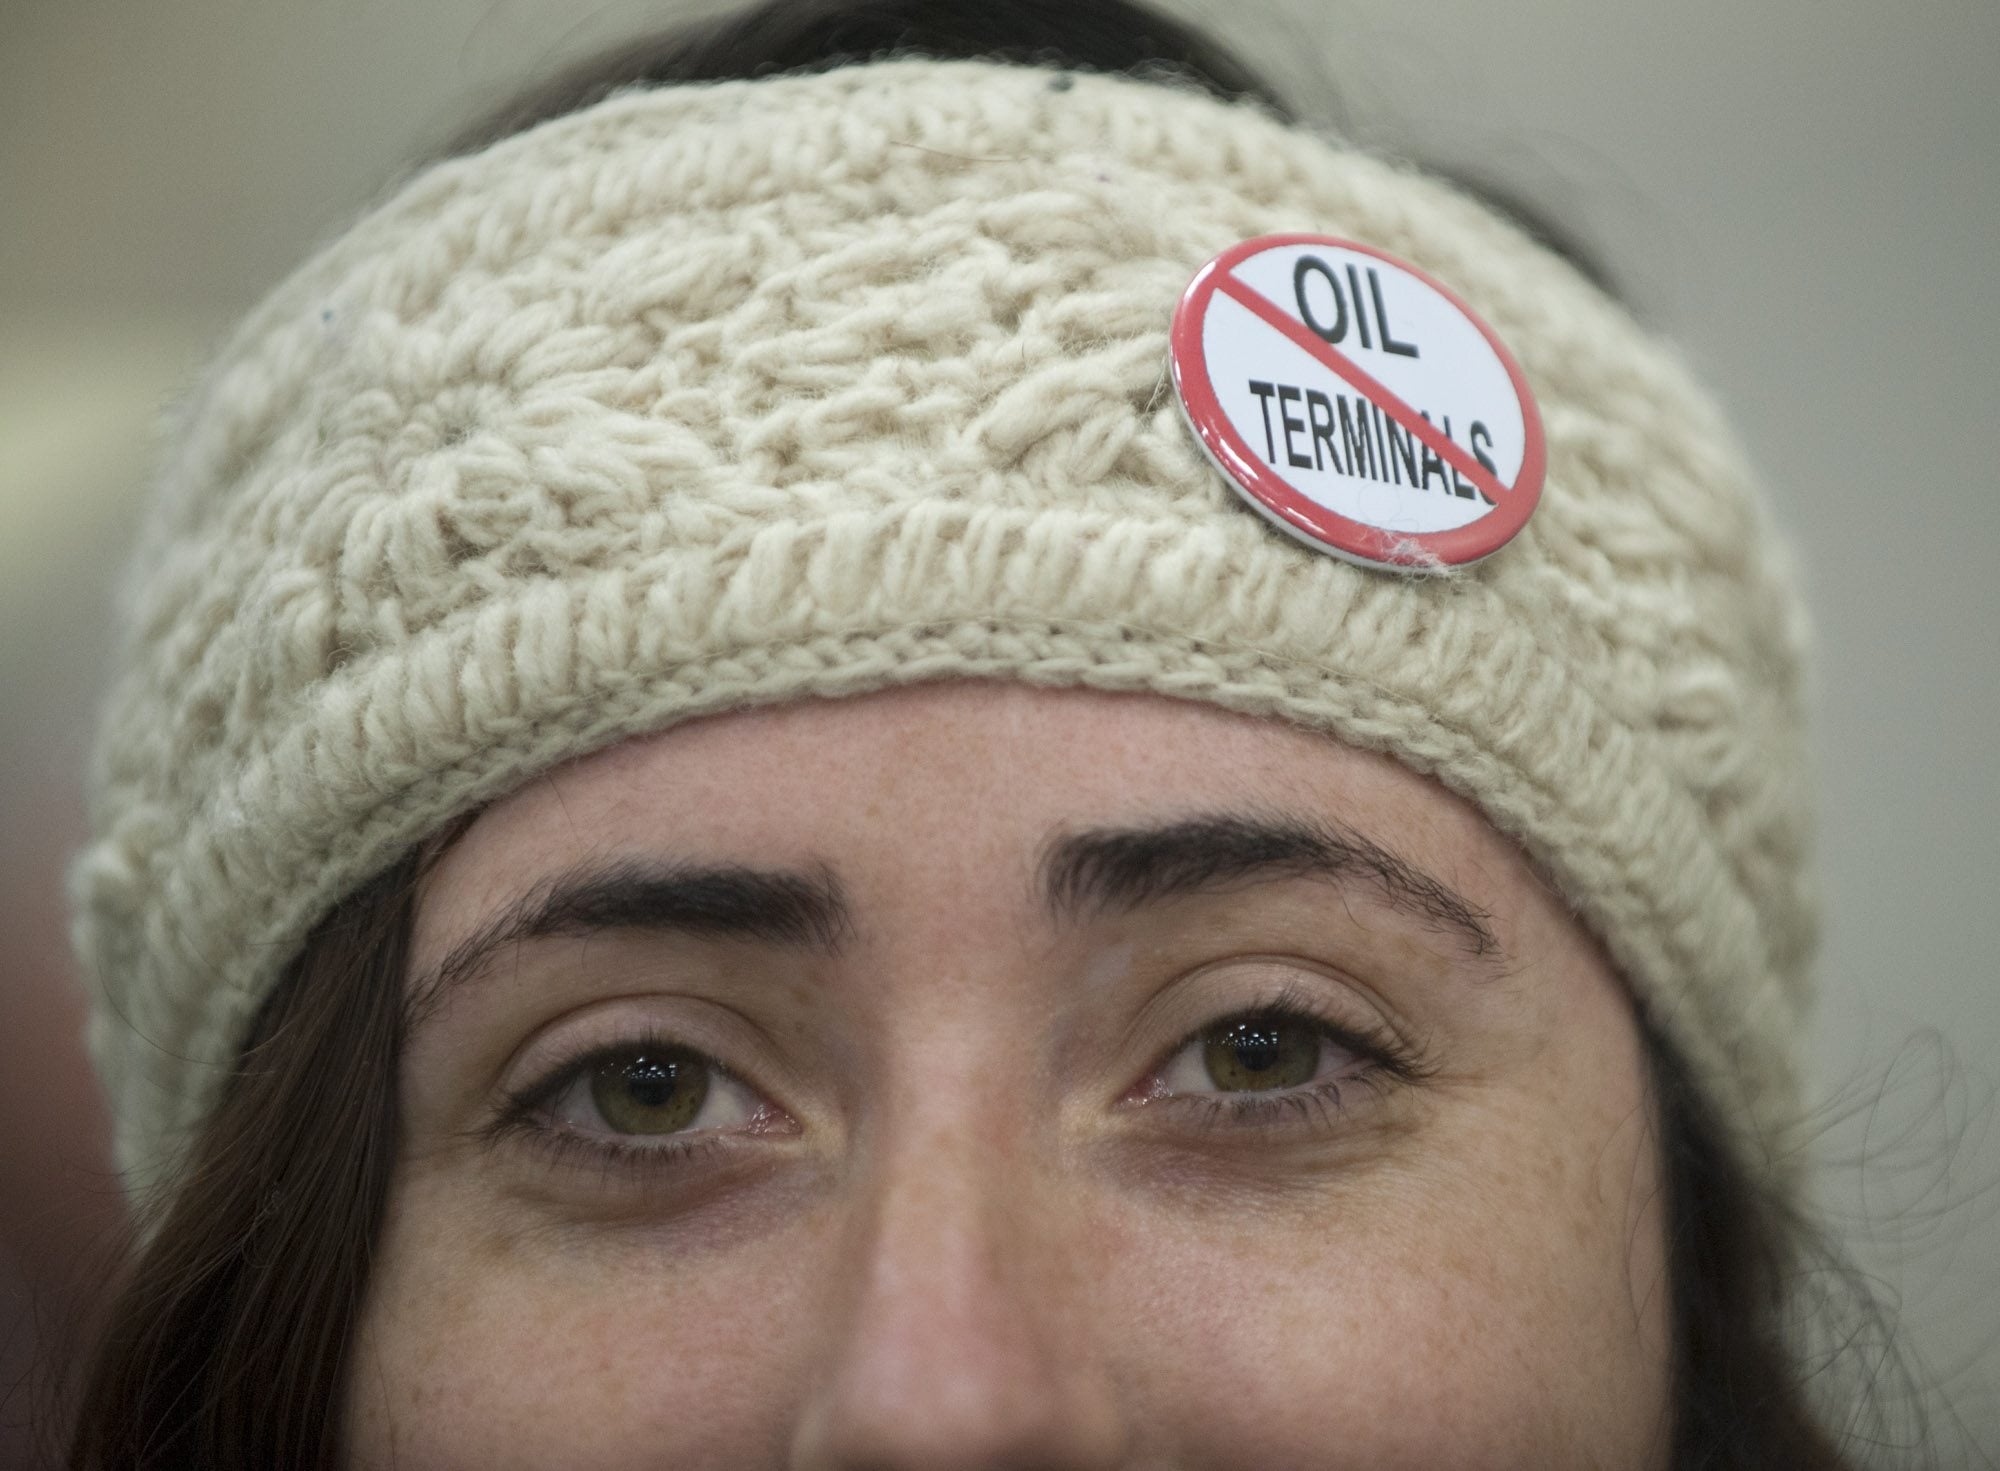 Erin Murdock wears a button indicating she is opposed to the building of an oil transfer terminal, at the first public hearing on the matter in Vancouver January 5, 2016. The state Energy Facility Site Evaluation Council, the state regulatory body that is reviewing the project, called the hearing.